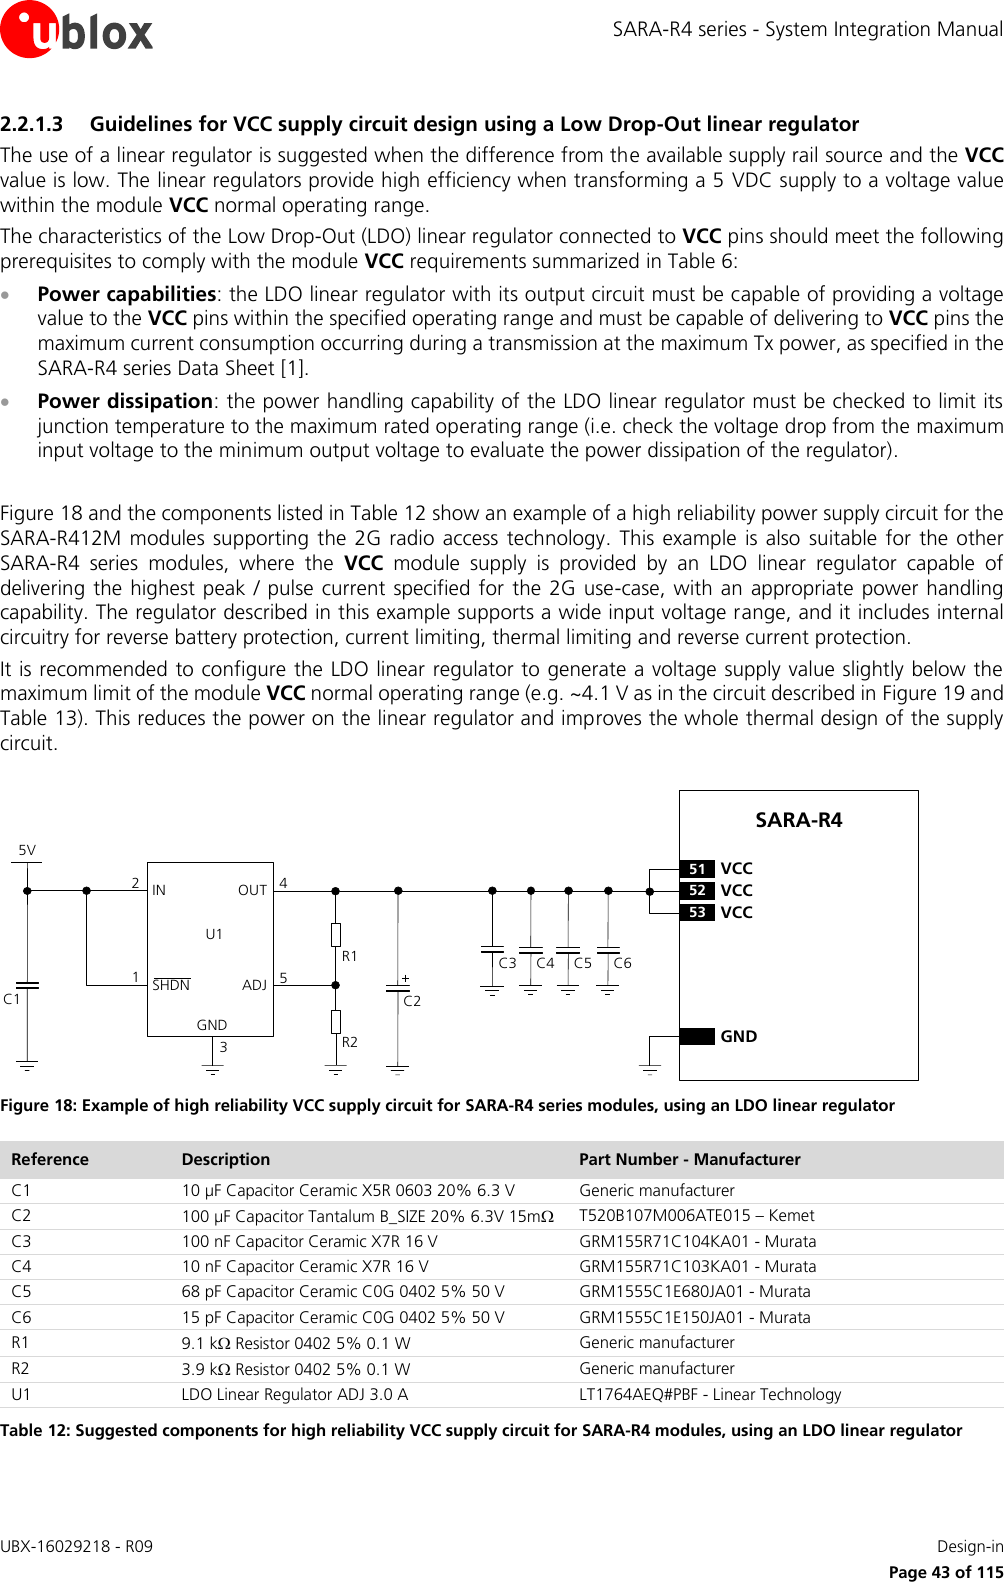 SARA-R4 series - System Integration Manual UBX-16029218 - R09    Design-in     Page 43 of 115 2.2.1.3 Guidelines for VCC supply circuit design using a Low Drop-Out linear regulator The use of a linear regulator is suggested when the difference from the available supply rail source and the VCC value is low. The linear regulators provide high efficiency when transforming a 5 VDC supply to a voltage value within the module VCC normal operating range. The characteristics of the Low Drop-Out (LDO) linear regulator connected to VCC pins should meet the following prerequisites to comply with the module VCC requirements summarized in Table 6:  Power capabilities: the LDO linear regulator with its output circuit must be capable of providing a voltage value to the VCC pins within the specified operating range and must be capable of delivering to VCC pins the maximum current consumption occurring during a transmission at the maximum Tx power, as specified in the SARA-R4 series Data Sheet [1].  Power dissipation: the power handling capability of the LDO linear regulator must be checked to limit its junction temperature to the maximum rated operating range (i.e. check the voltage drop from the maximum input voltage to the minimum output voltage to evaluate the power dissipation of the regulator).  Figure 18 and the components listed in Table 12 show an example of a high reliability power supply circuit for the SARA-R412M  modules supporting  the 2G radio  access technology. This  example is also  suitable  for  the  other SARA-R4  series  modules,  where  the  VCC  module  supply  is  provided  by  an  LDO  linear  regulator  capable  of delivering the highest peak / pulse current specified for the 2G use-case, with an appropriate power handling capability. The regulator described in this example supports a wide input voltage range, and it includes internal circuitry for reverse battery protection, current limiting, thermal limiting and reverse current protection. It is recommended to configure the LDO linear regulator to generate a voltage supply value slightly below the maximum limit of the module VCC normal operating range (e.g. ~4.1 V as in the circuit described in Figure 19 and Table 13). This reduces the power on the linear regulator and improves the whole thermal design of the supply circuit.  5VC1IN OUTADJGND12453R1R2U1SHDNSARA-R452 VCC53 VCC51 VCCGNDC2C3 C4 C5 C6 Figure 18: Example of high reliability VCC supply circuit for SARA-R4 series modules, using an LDO linear regulator Reference Description Part Number - Manufacturer C1 10 µF Capacitor Ceramic X5R 0603 20% 6.3 V Generic manufacturer C2 100 µF Capacitor Tantalum B_SIZE 20% 6.3V 15m T520B107M006ATE015 – Kemet C3 100 nF Capacitor Ceramic X7R 16 V GRM155R71C104KA01 - Murata C4 10 nF Capacitor Ceramic X7R 16 V GRM155R71C103KA01 - Murata C5 68 pF Capacitor Ceramic C0G 0402 5% 50 V GRM1555C1E680JA01 - Murata C6 15 pF Capacitor Ceramic C0G 0402 5% 50 V GRM1555C1E150JA01 - Murata R1 9.1 k Resistor 0402 5% 0.1 W Generic manufacturer R2 3.9 k Resistor 0402 5% 0.1 W Generic manufacturer U1 LDO Linear Regulator ADJ 3.0 A LT1764AEQ#PBF - Linear Technology Table 12: Suggested components for high reliability VCC supply circuit for SARA-R4 modules, using an LDO linear regulator 